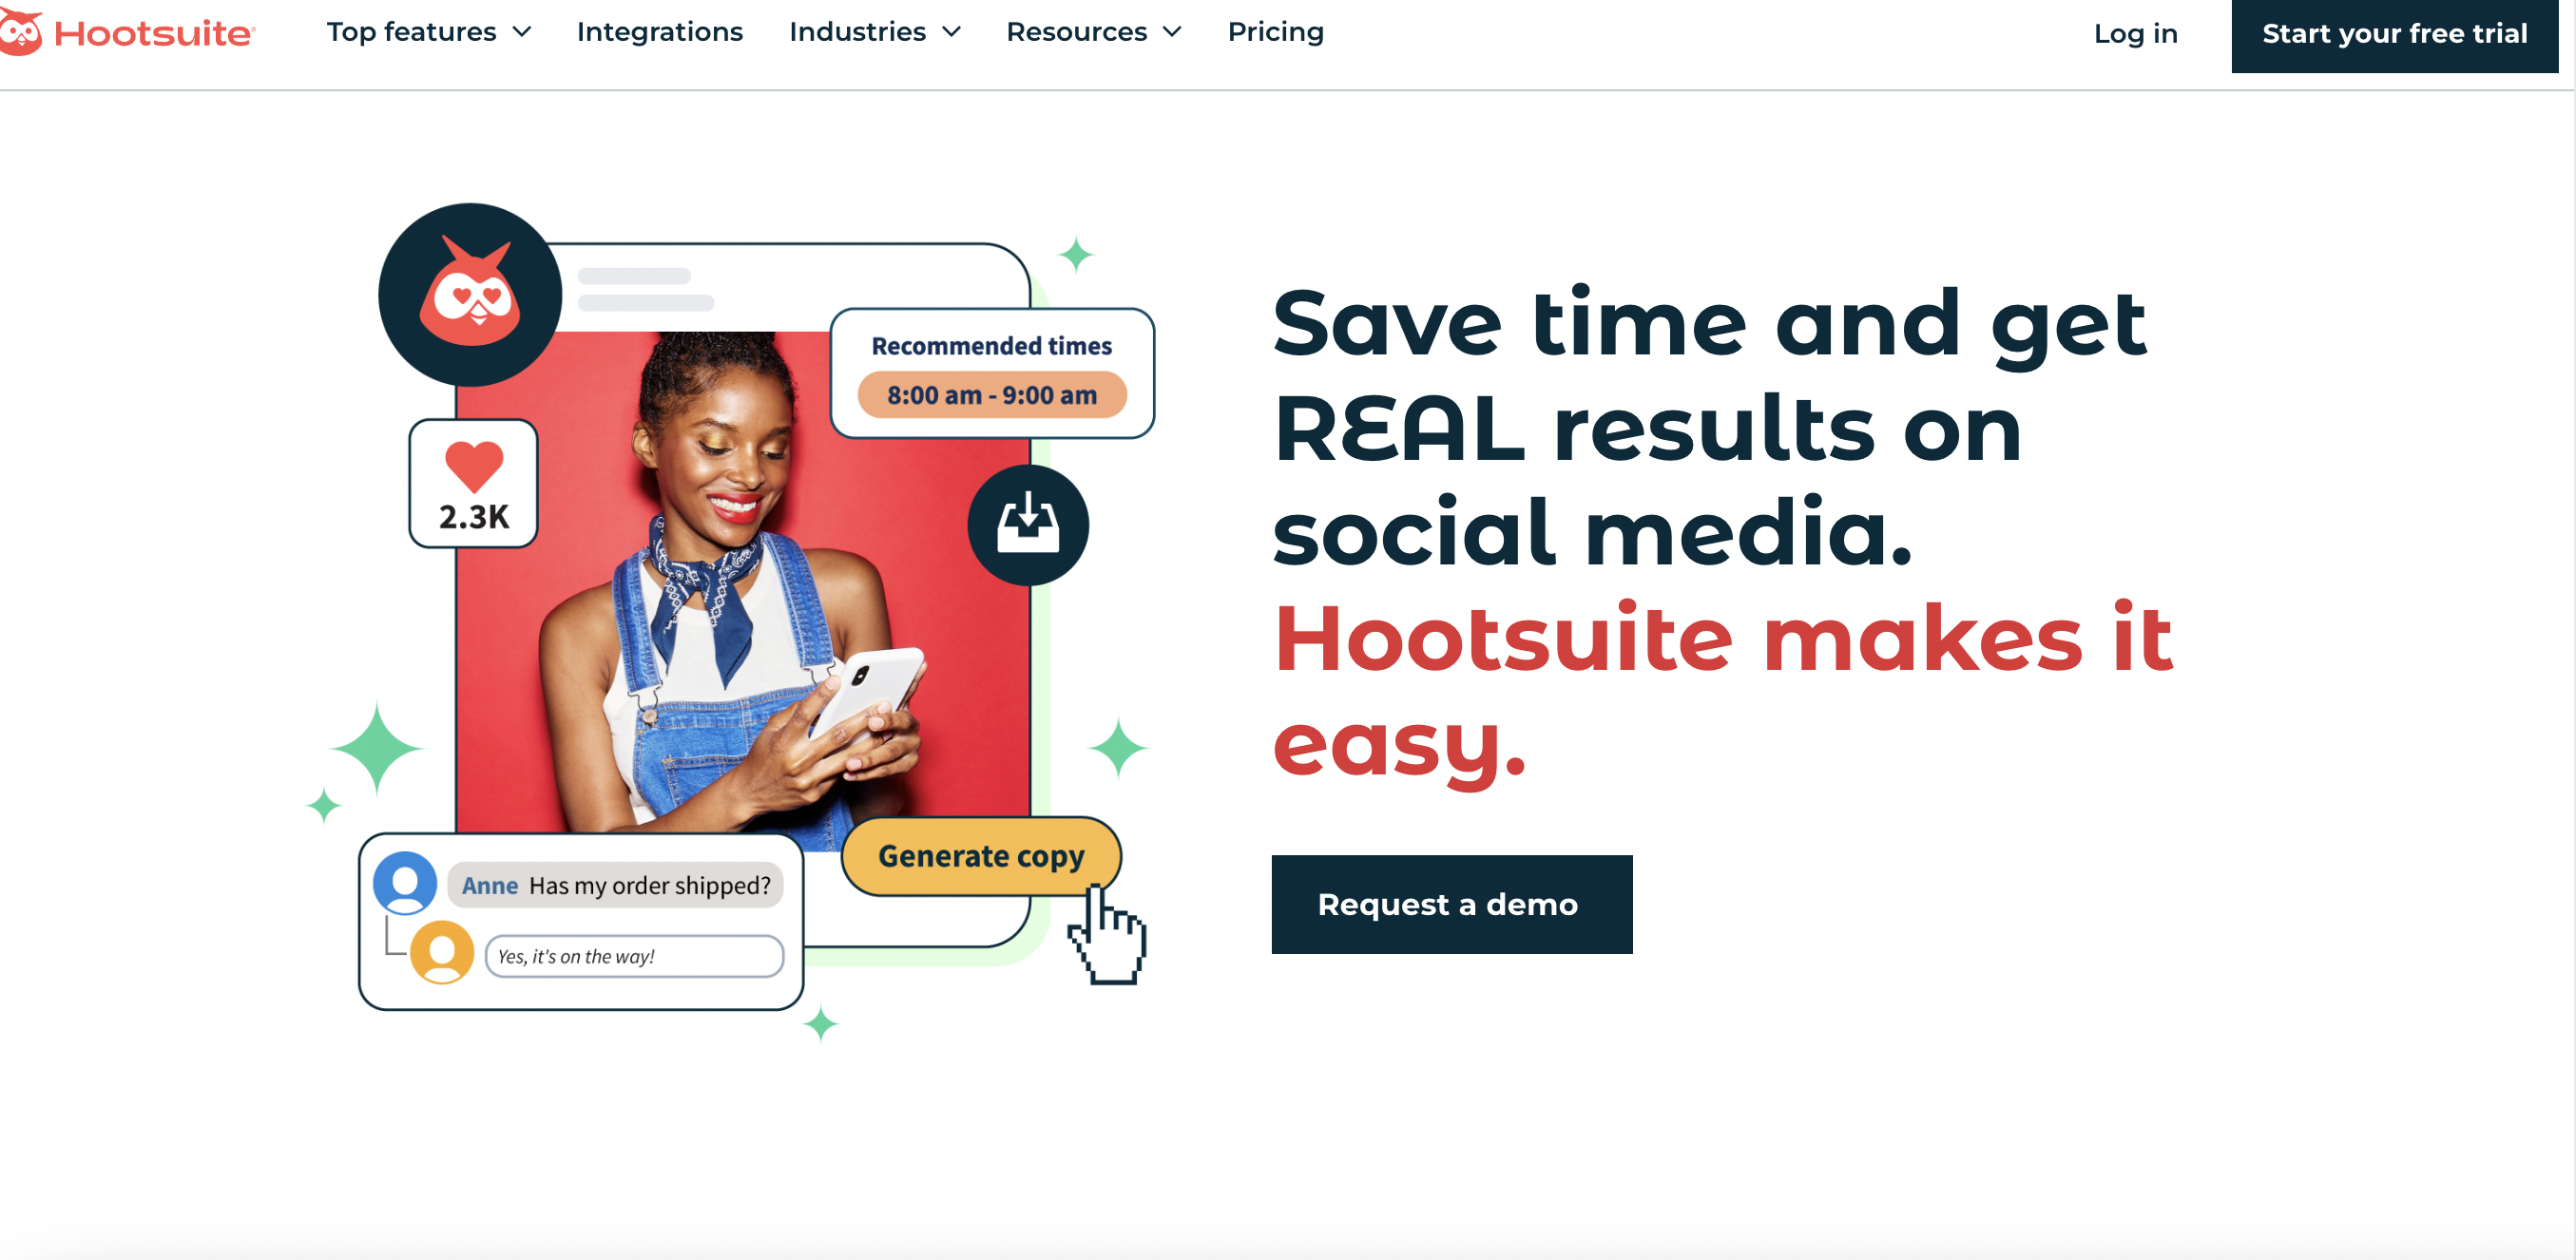 Hootsuite homepage showing a woman smiling as she looks at her phone and the picture is overlayed with several bubbles highlighting the tool's features, and the text reads "save time and get REAL results on social media. Hootsuite makes it easy."